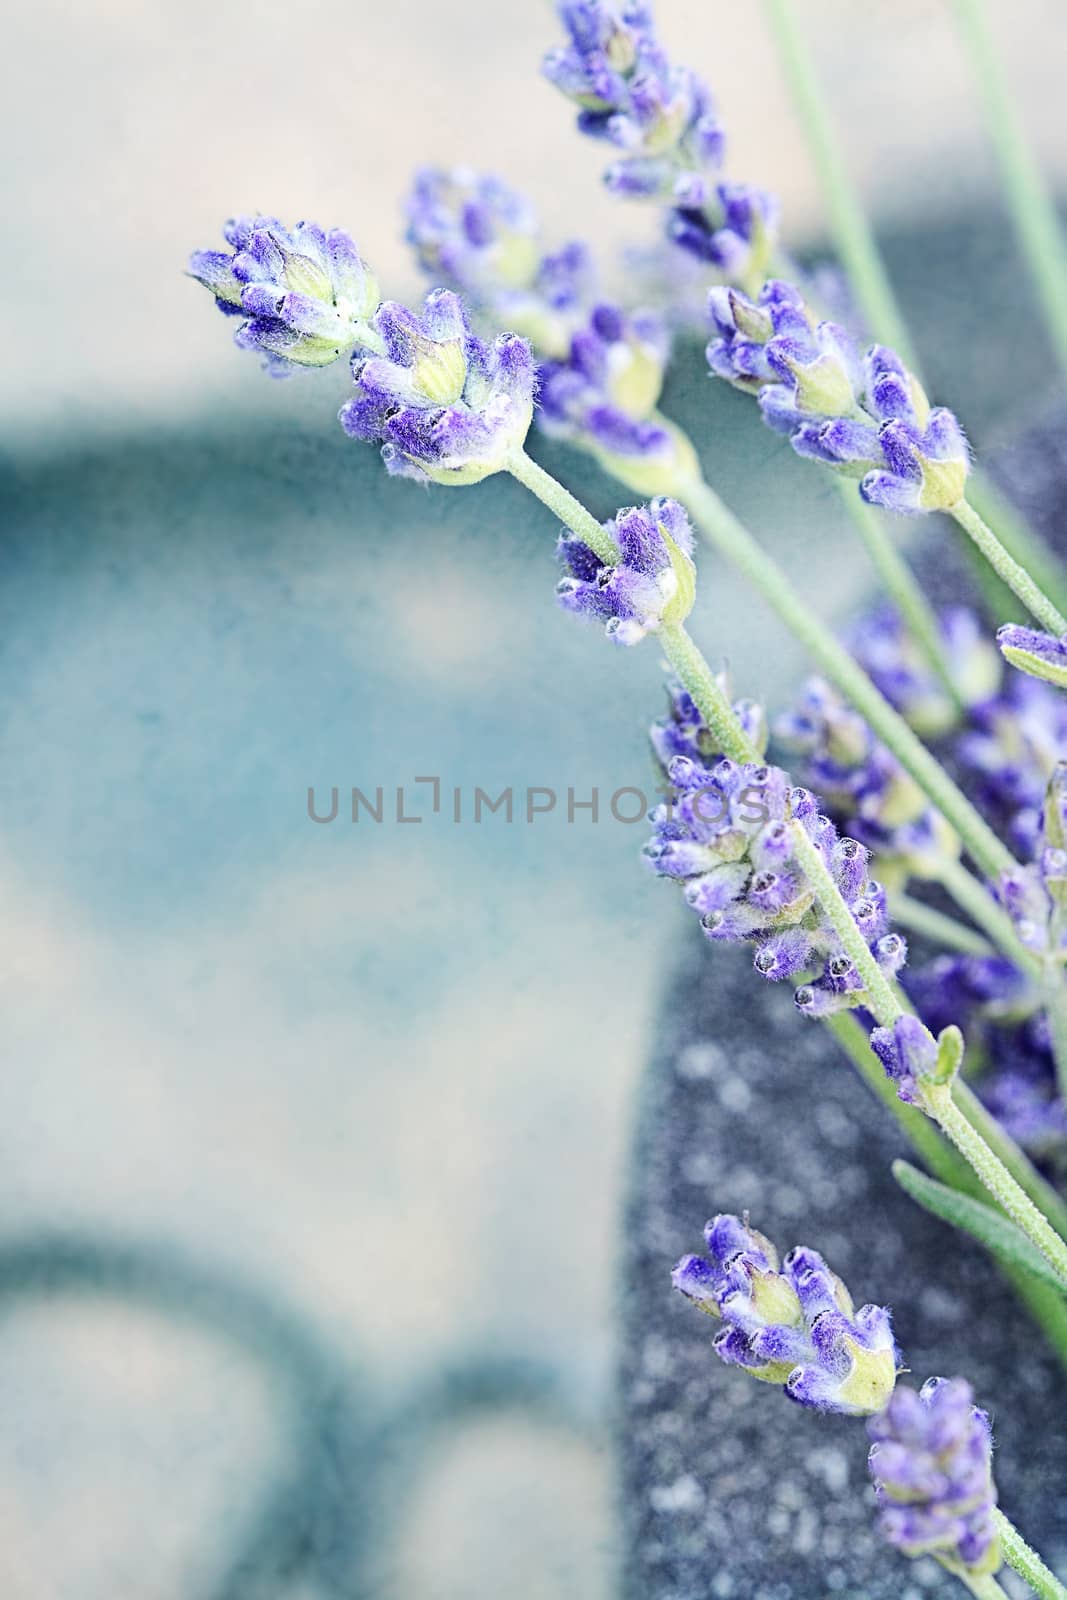 Lavender flowers in a mortar by StephanieFrey